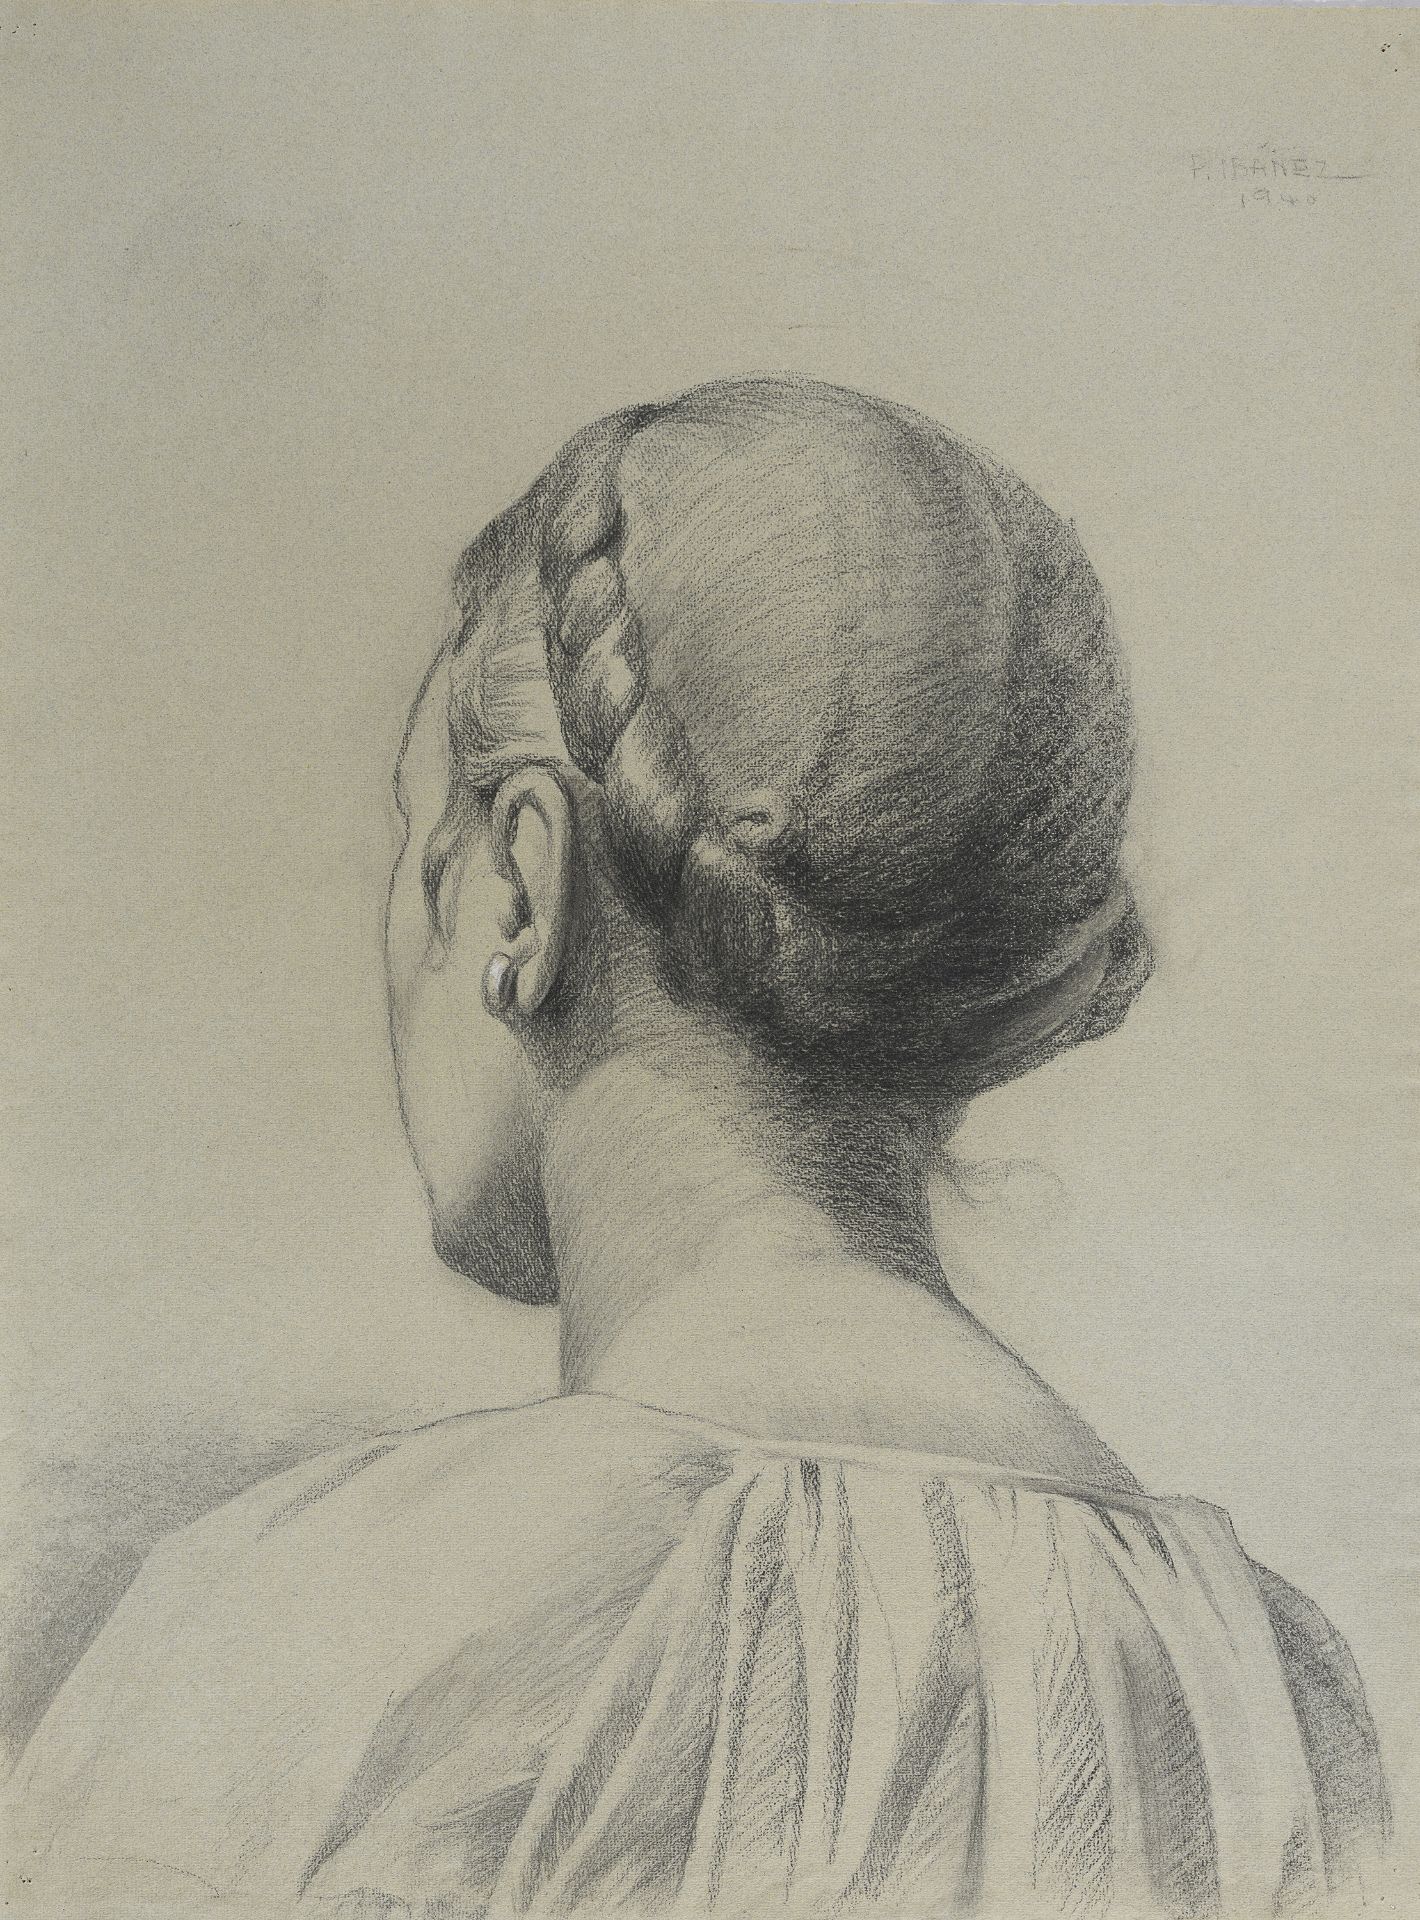 SPANISH PENCIL DRAWING EARLY 20TH CENTURY